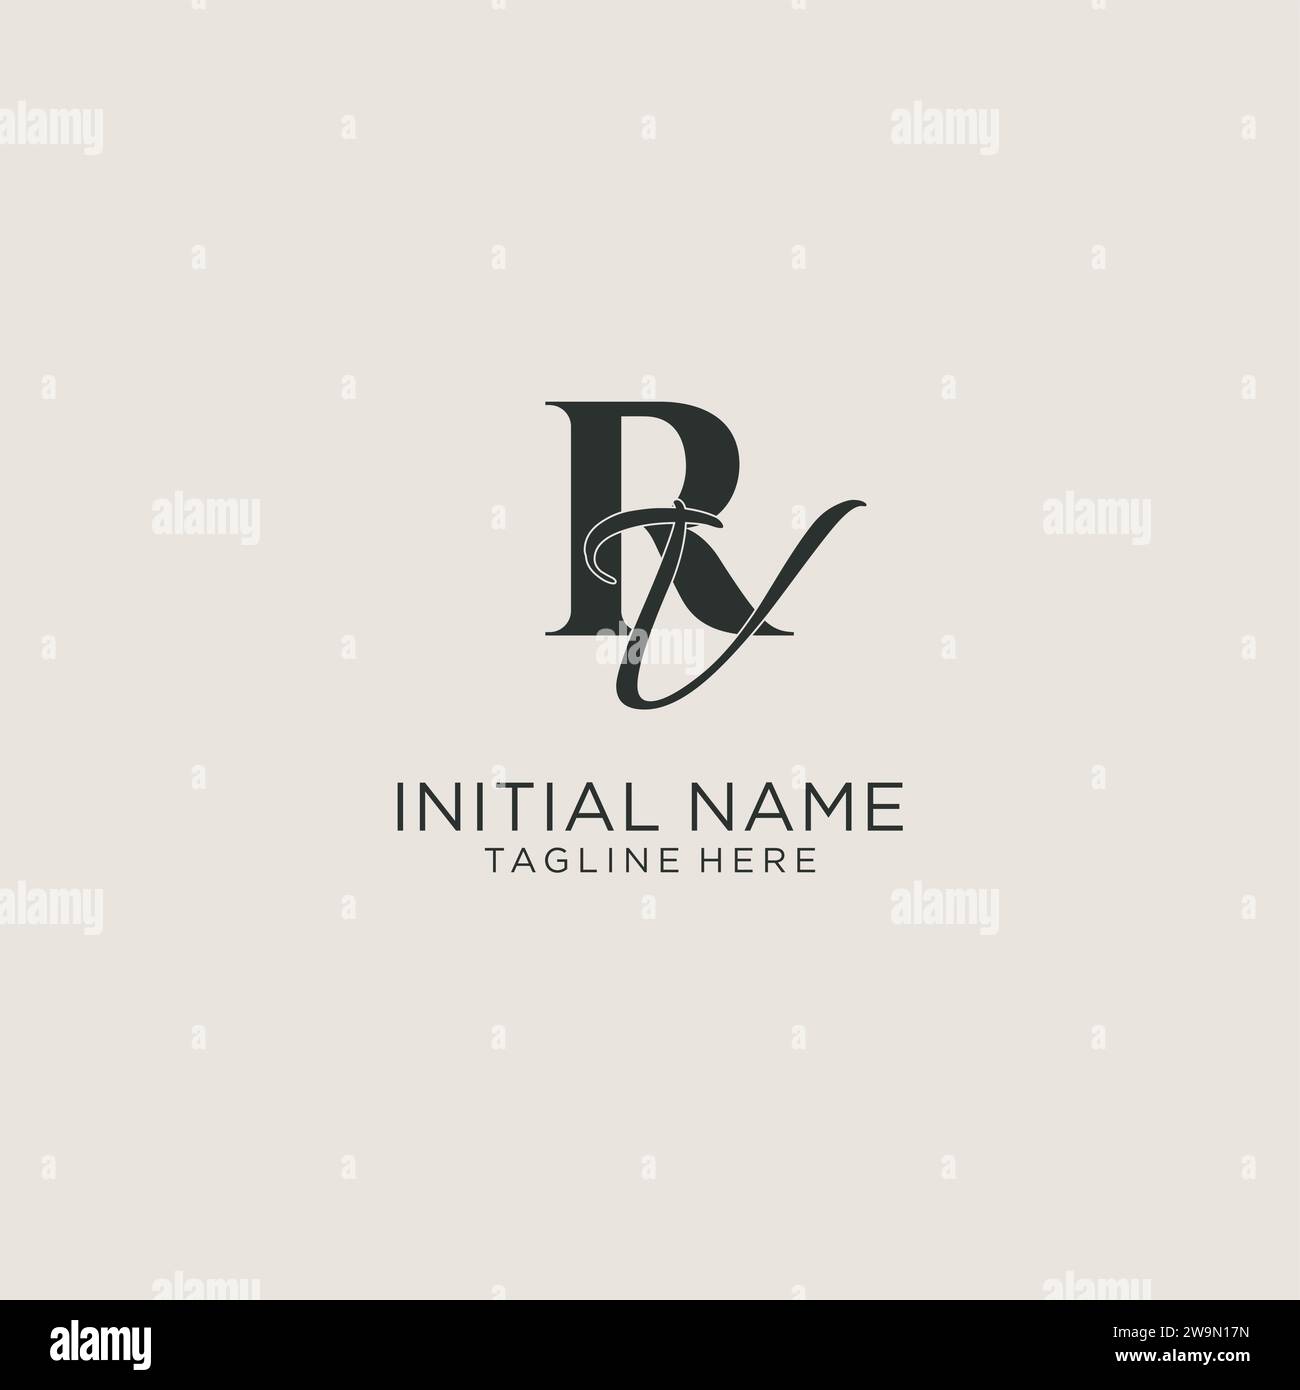 Initials RV letter monogram with elegant luxury style. Corporate identity and personal logo vector graphic Stock Vector